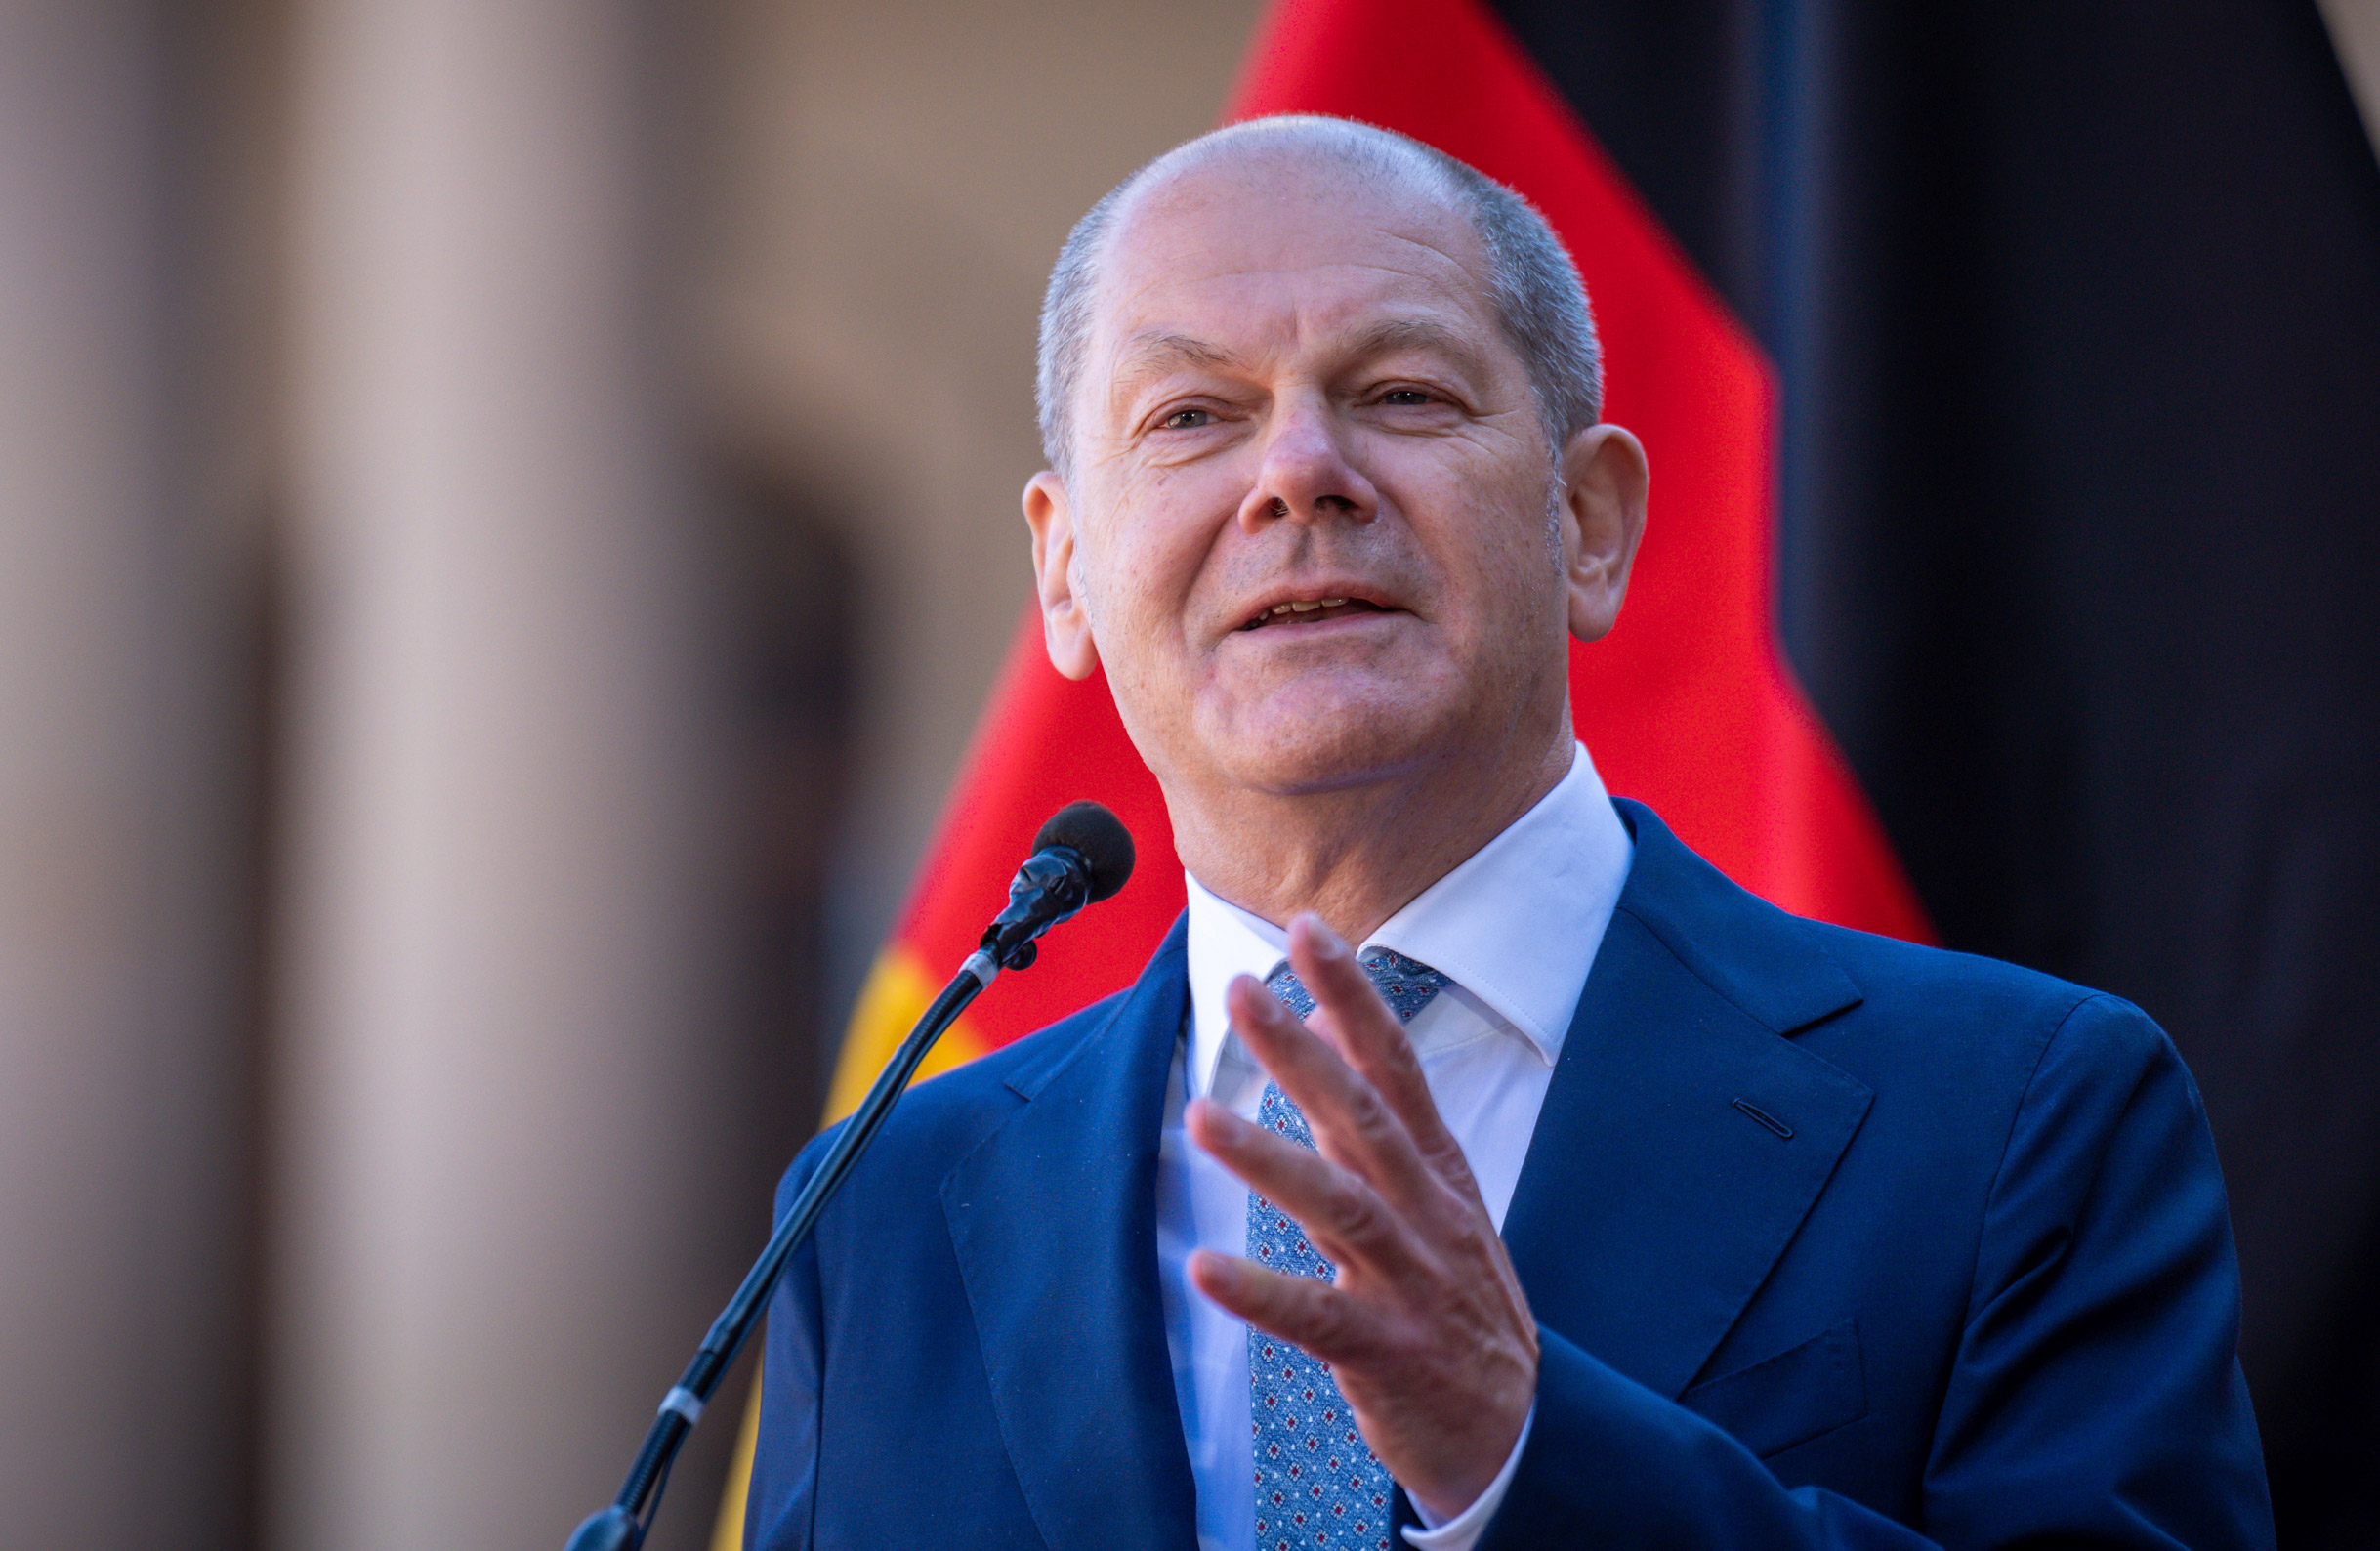 German Chancellor Olaf Scholz speaks at a press conference in Pretoria, South Africa in this file photo from May 24.